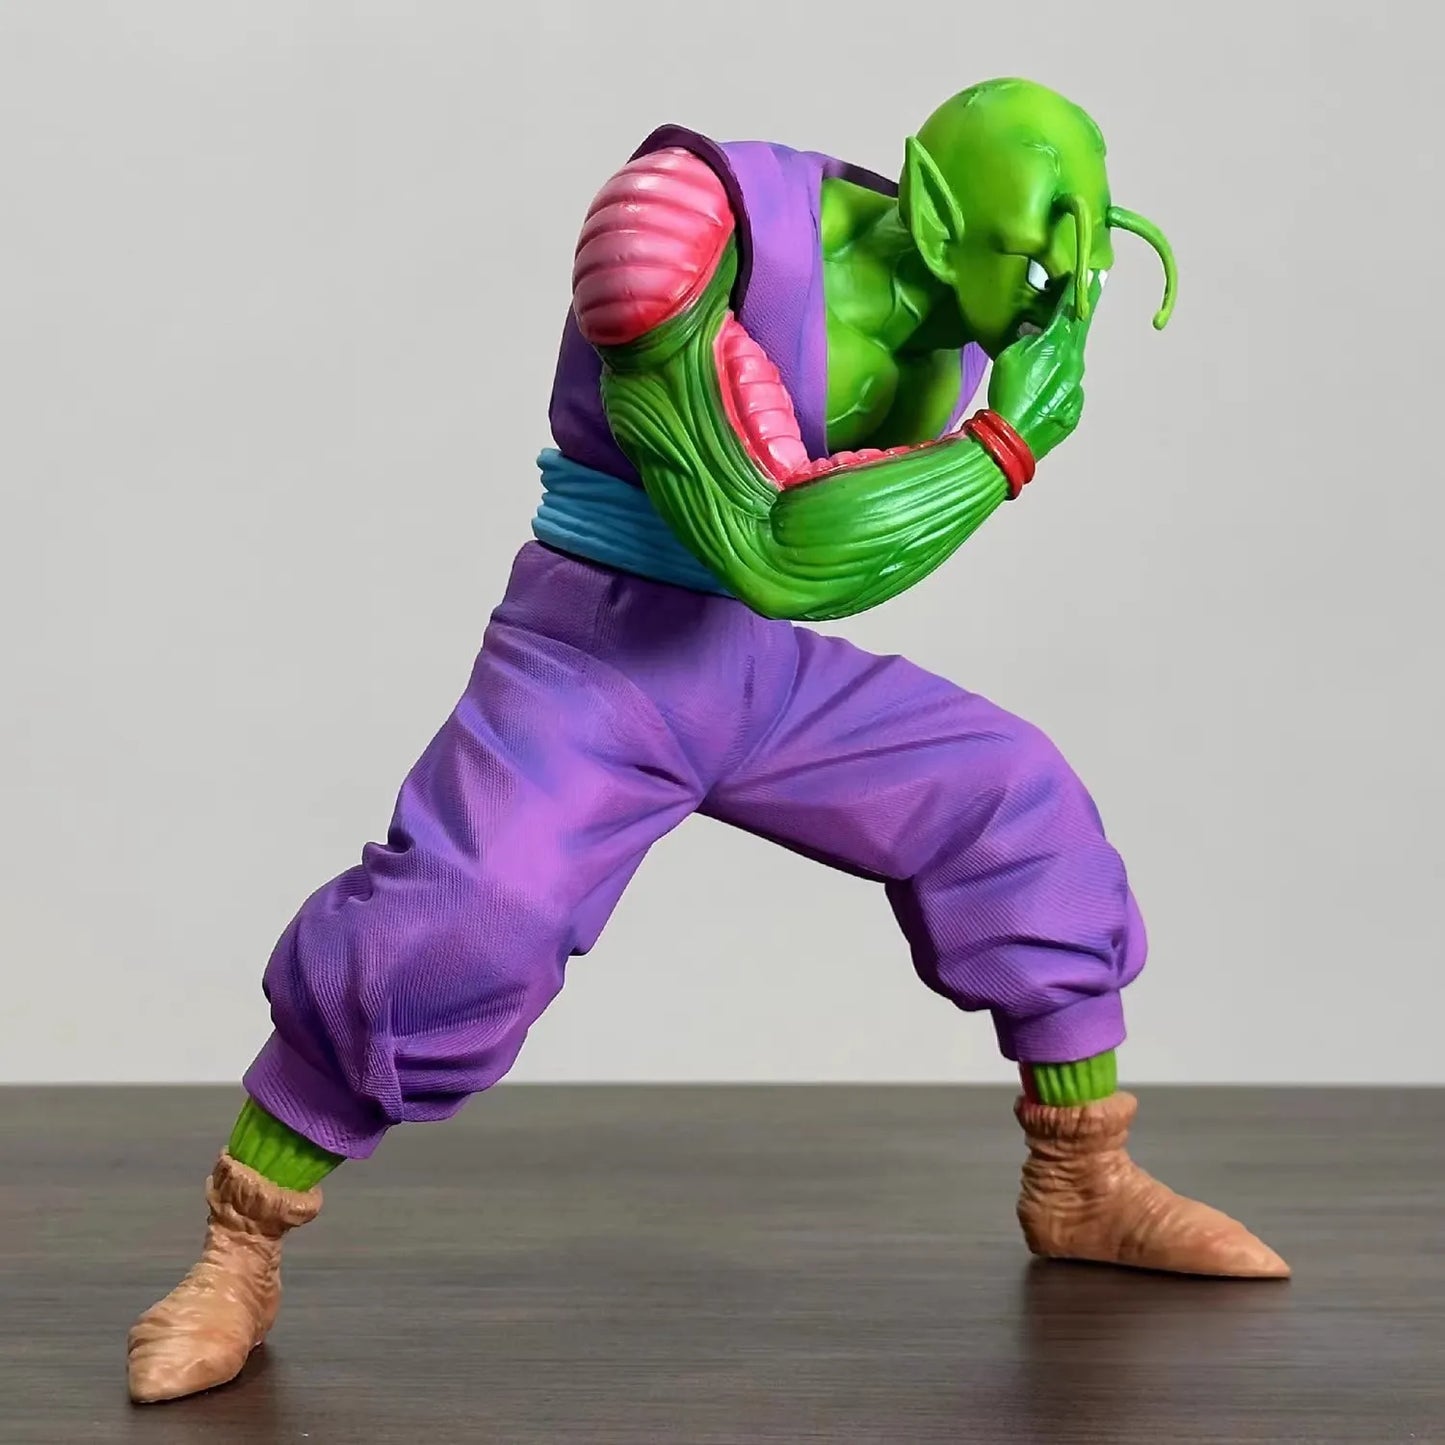 DBZ Inspired Piccolo Special Beam Cannon Stance Statue